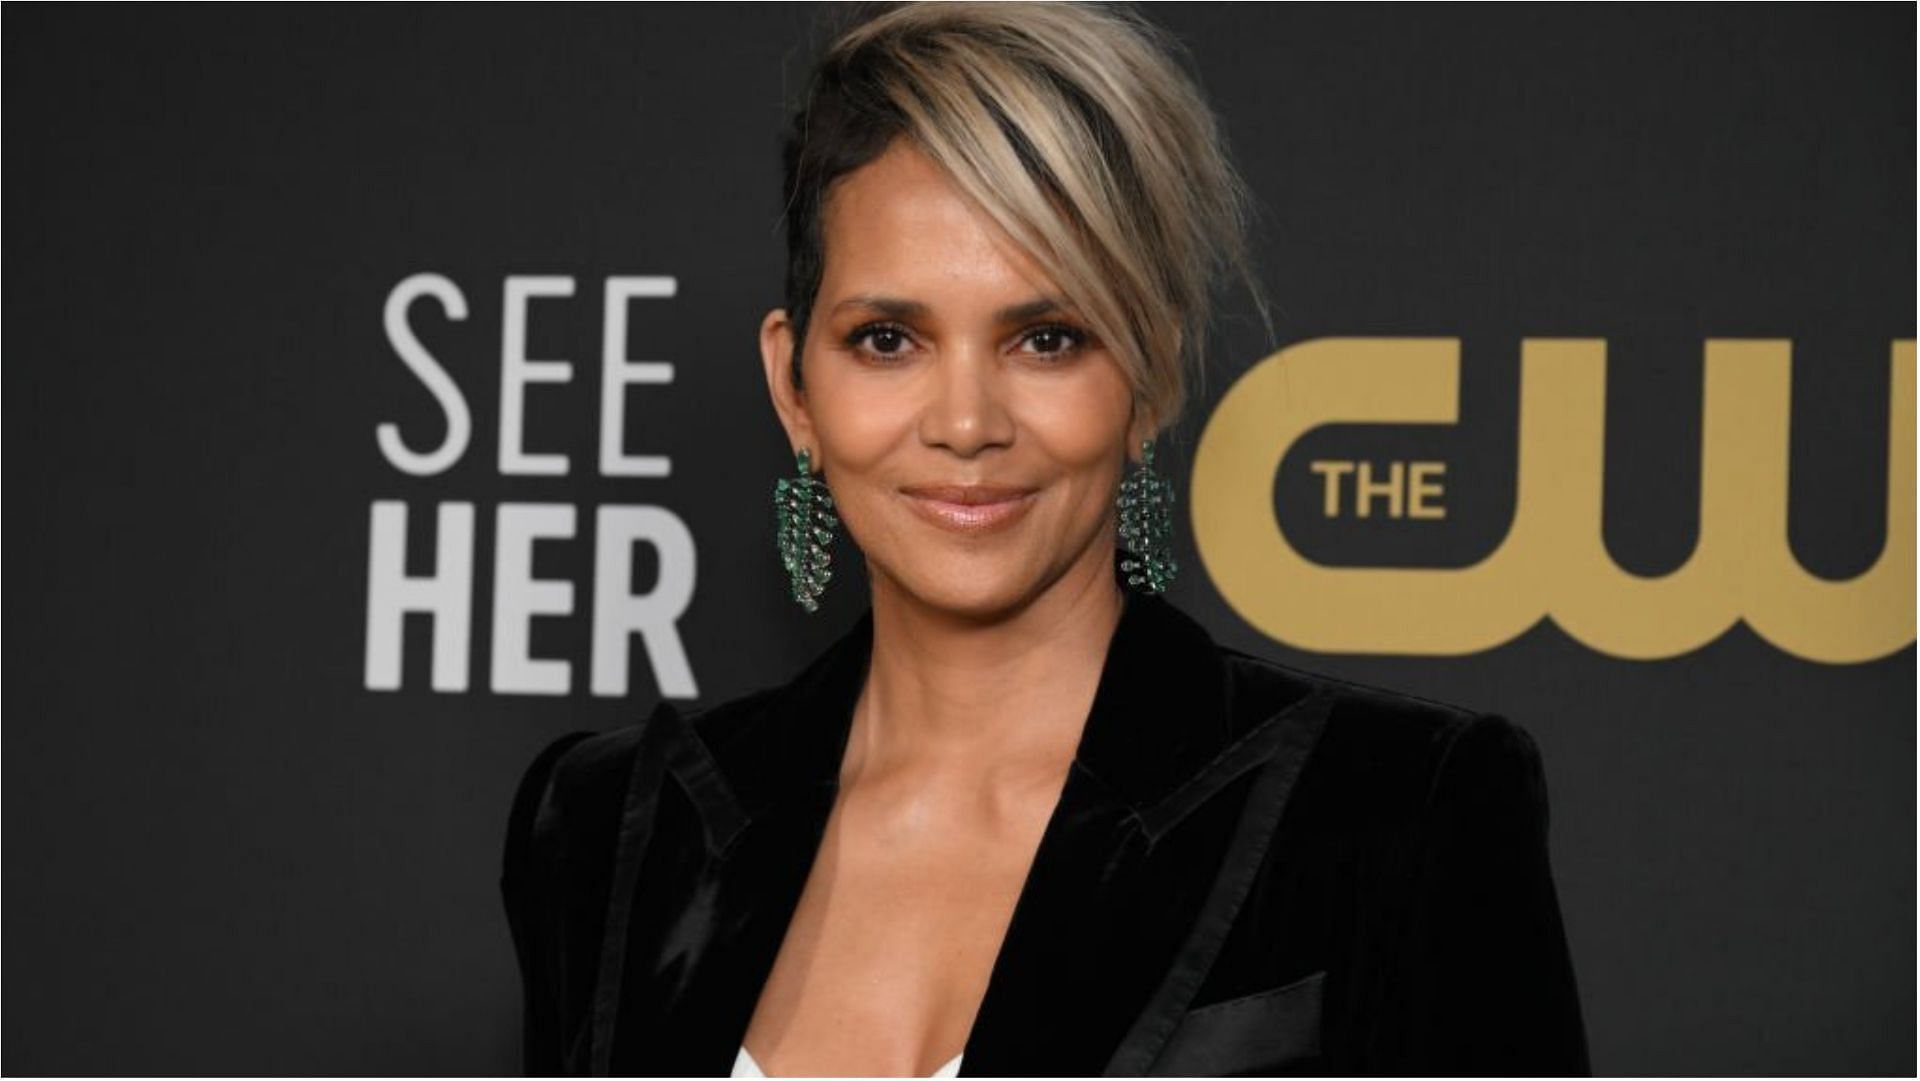 Halle Berry fell on stage during an event (Image via Michael Kovac/Getty Images)